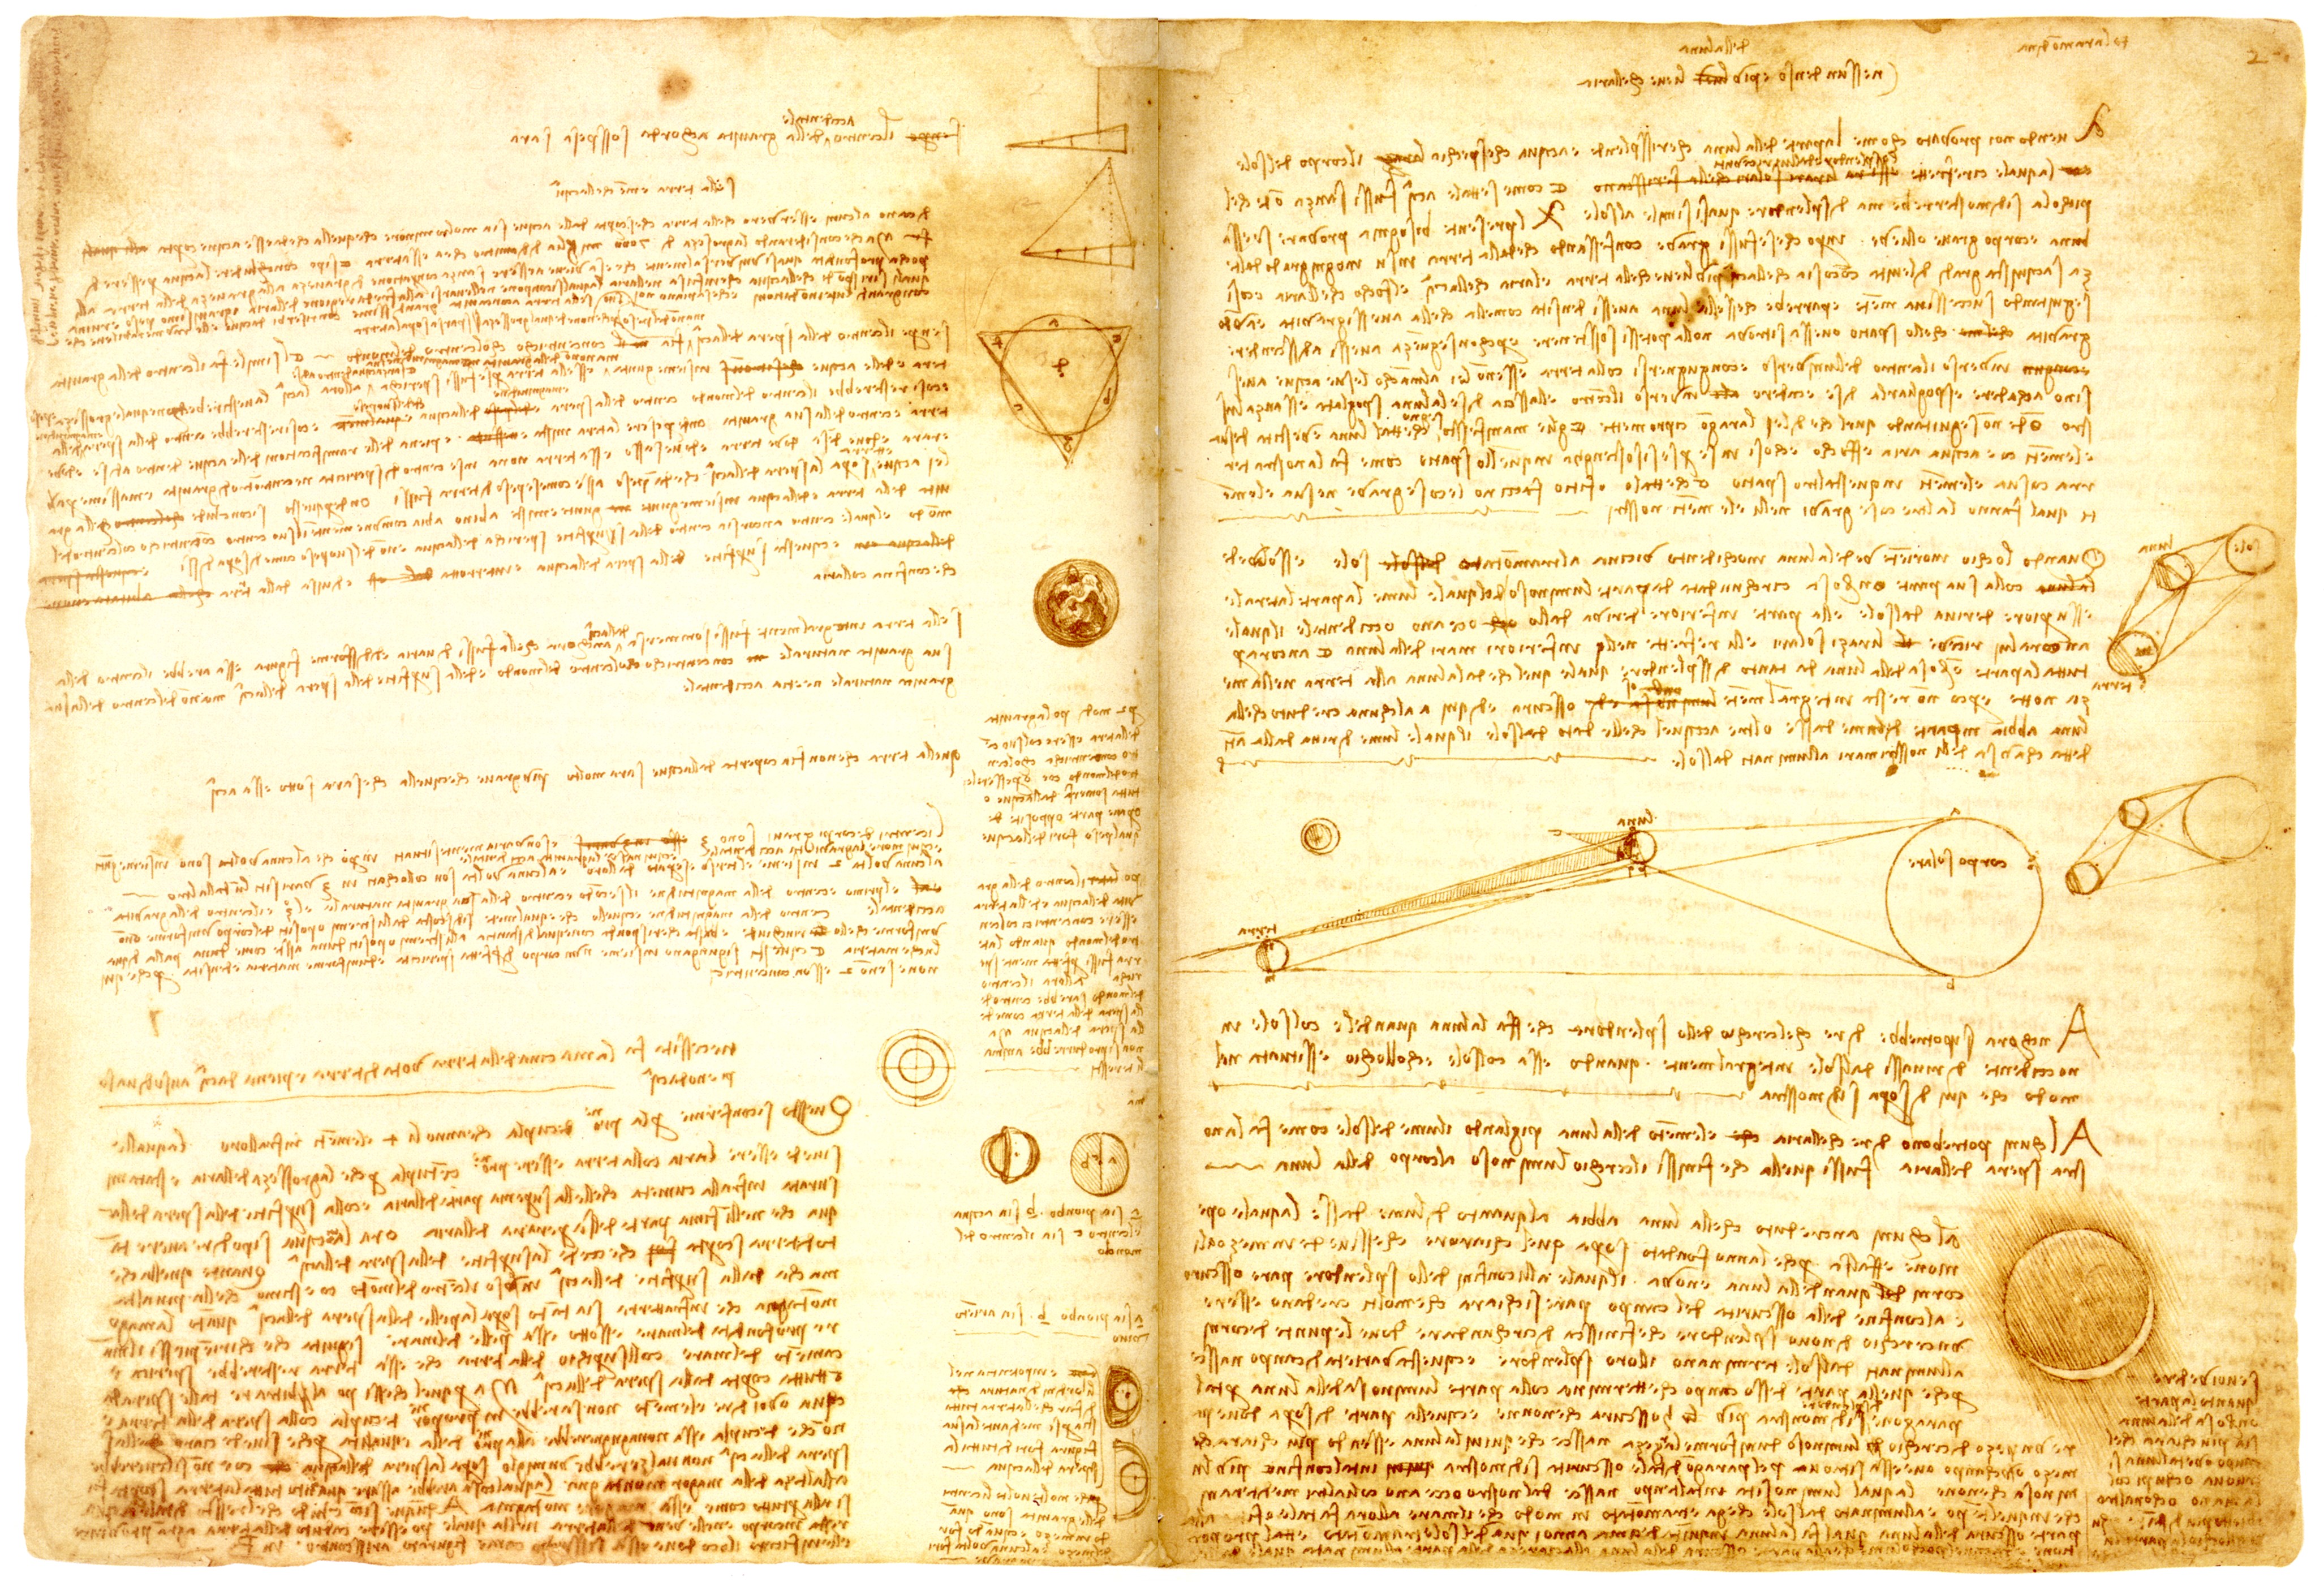 A page from Codex Leicester with Mirror-writing